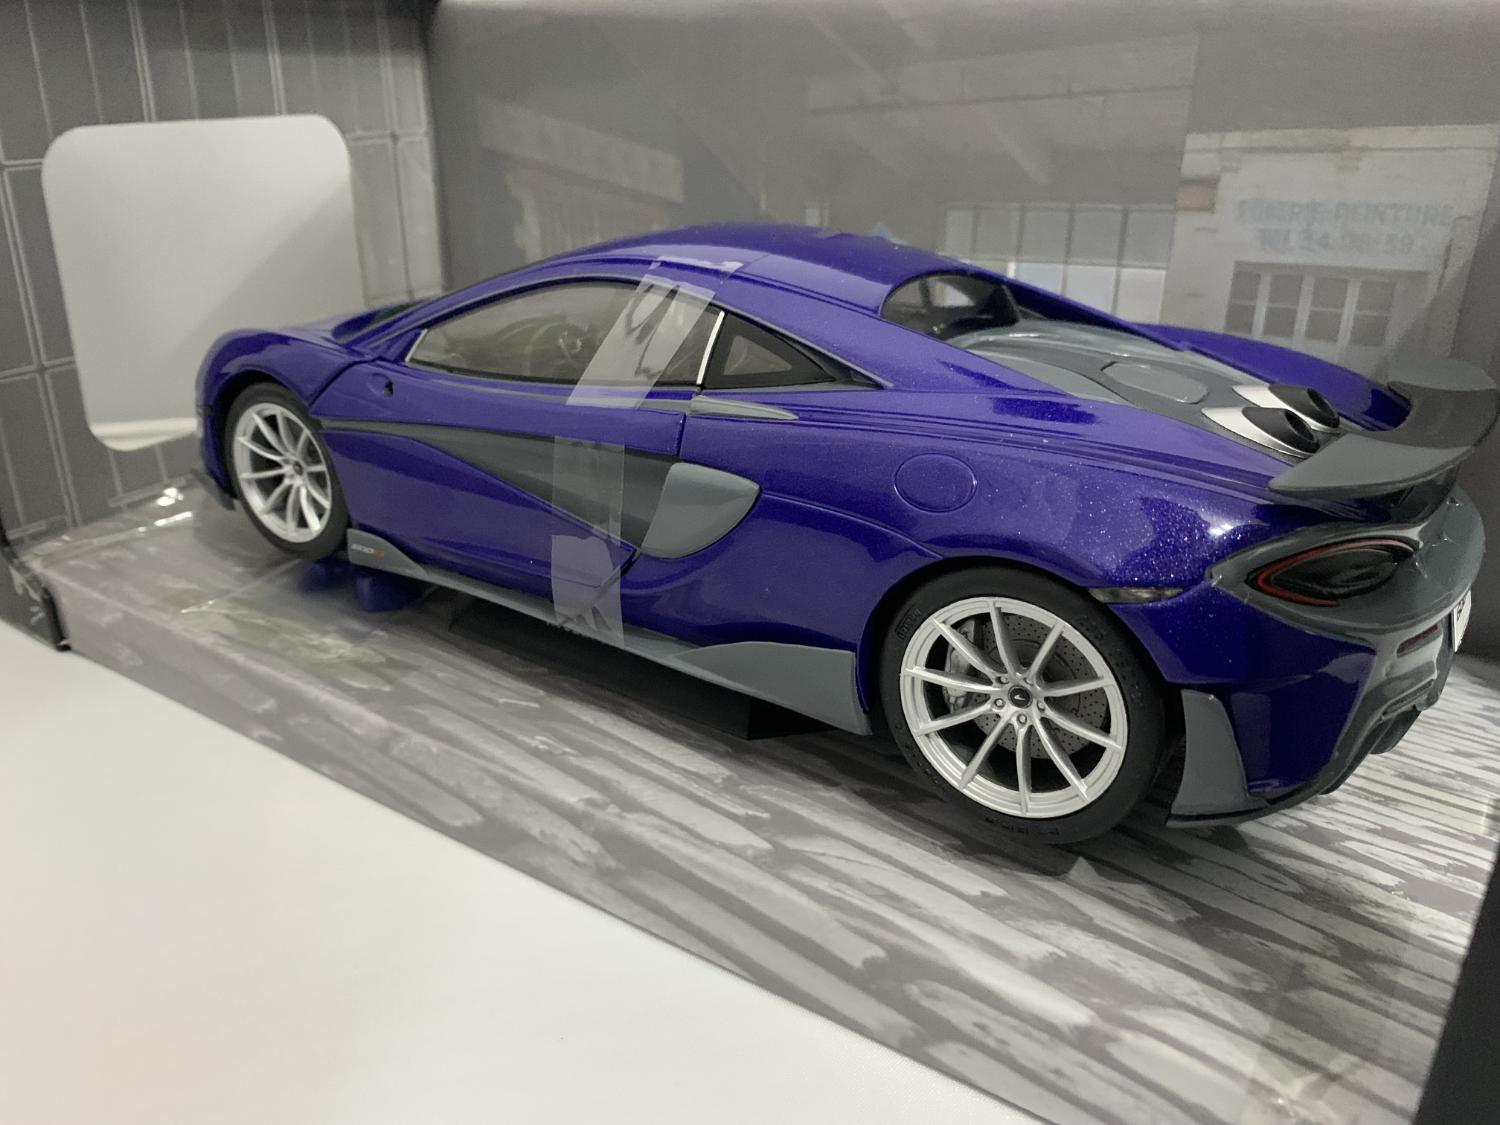 An excellent scale model of the McLaren 600LT with high level of detail throughout, all authentically recreated.  Model mounted on a removable plinth and is presented in a window display box.